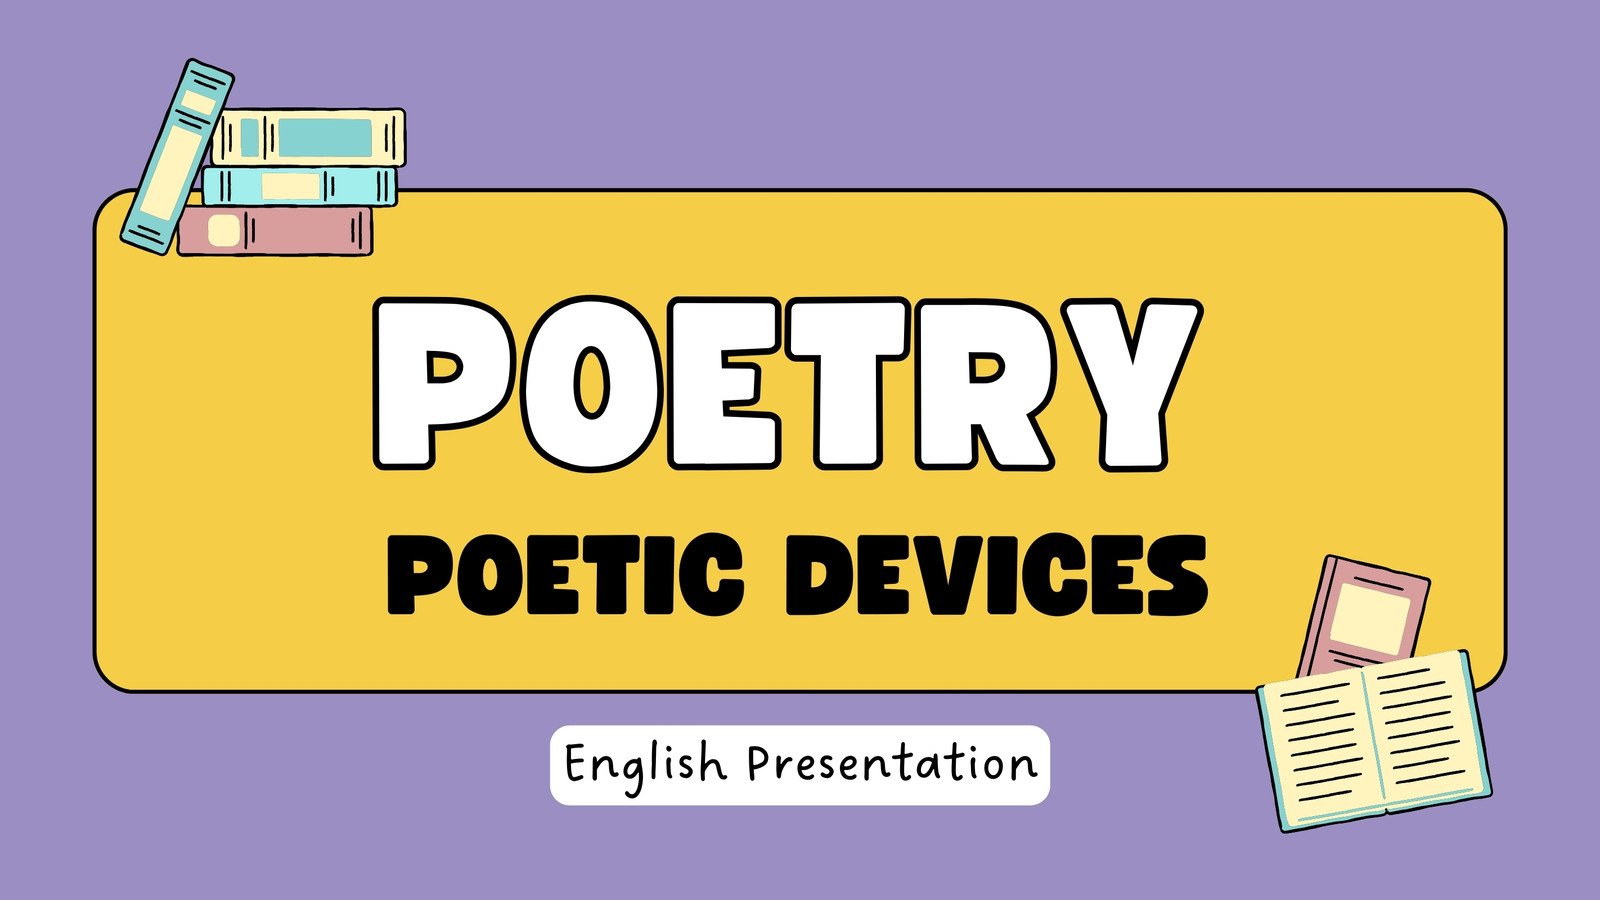 Poetry and Poetic Devices English Presentation in Yellow Purple Lined Graphic Style